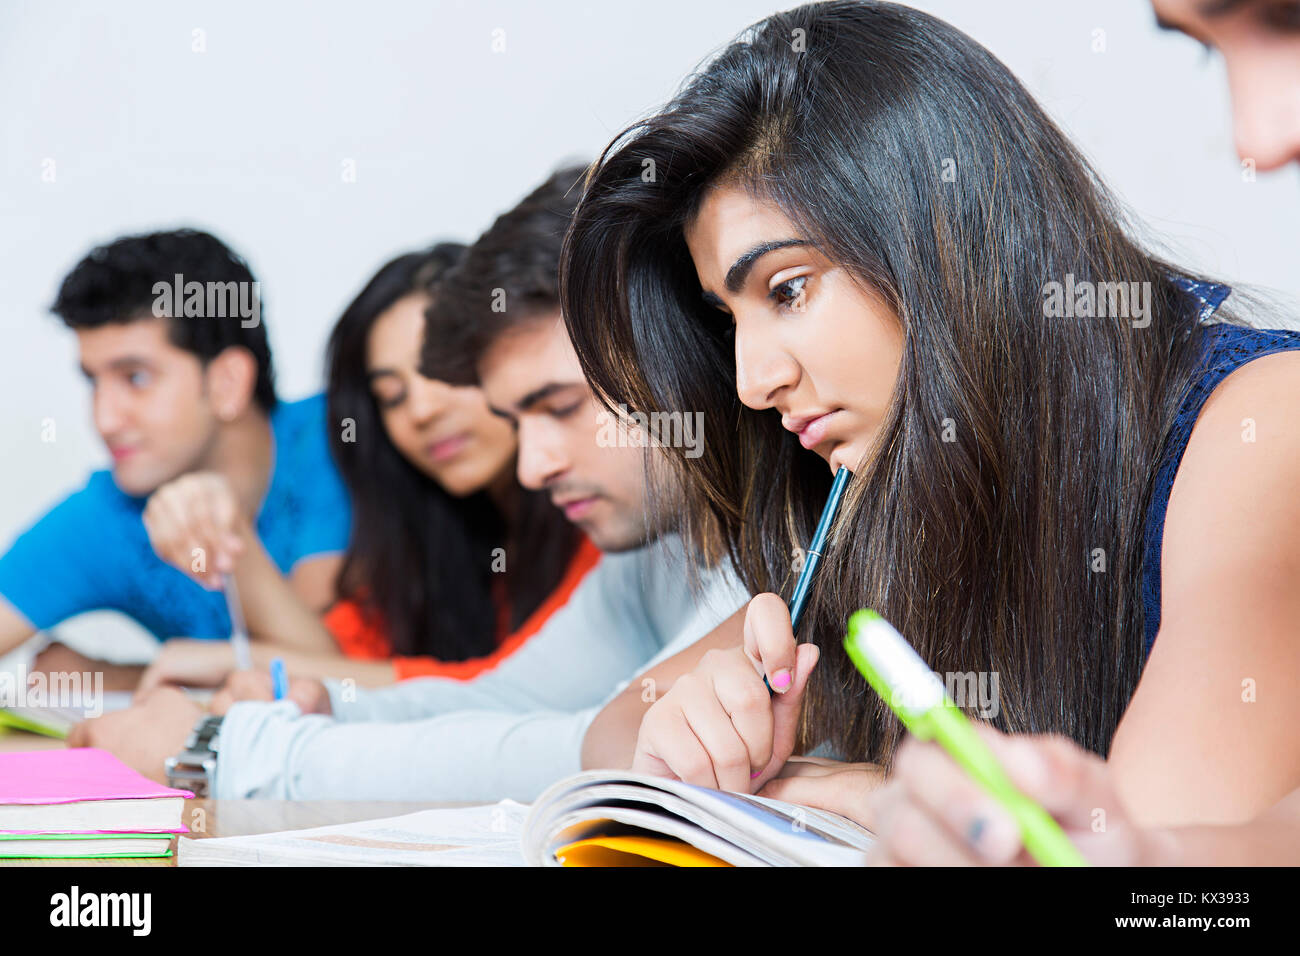 Group Indian College Students Reading Book Study Exam Preparation in Class Stock Photo